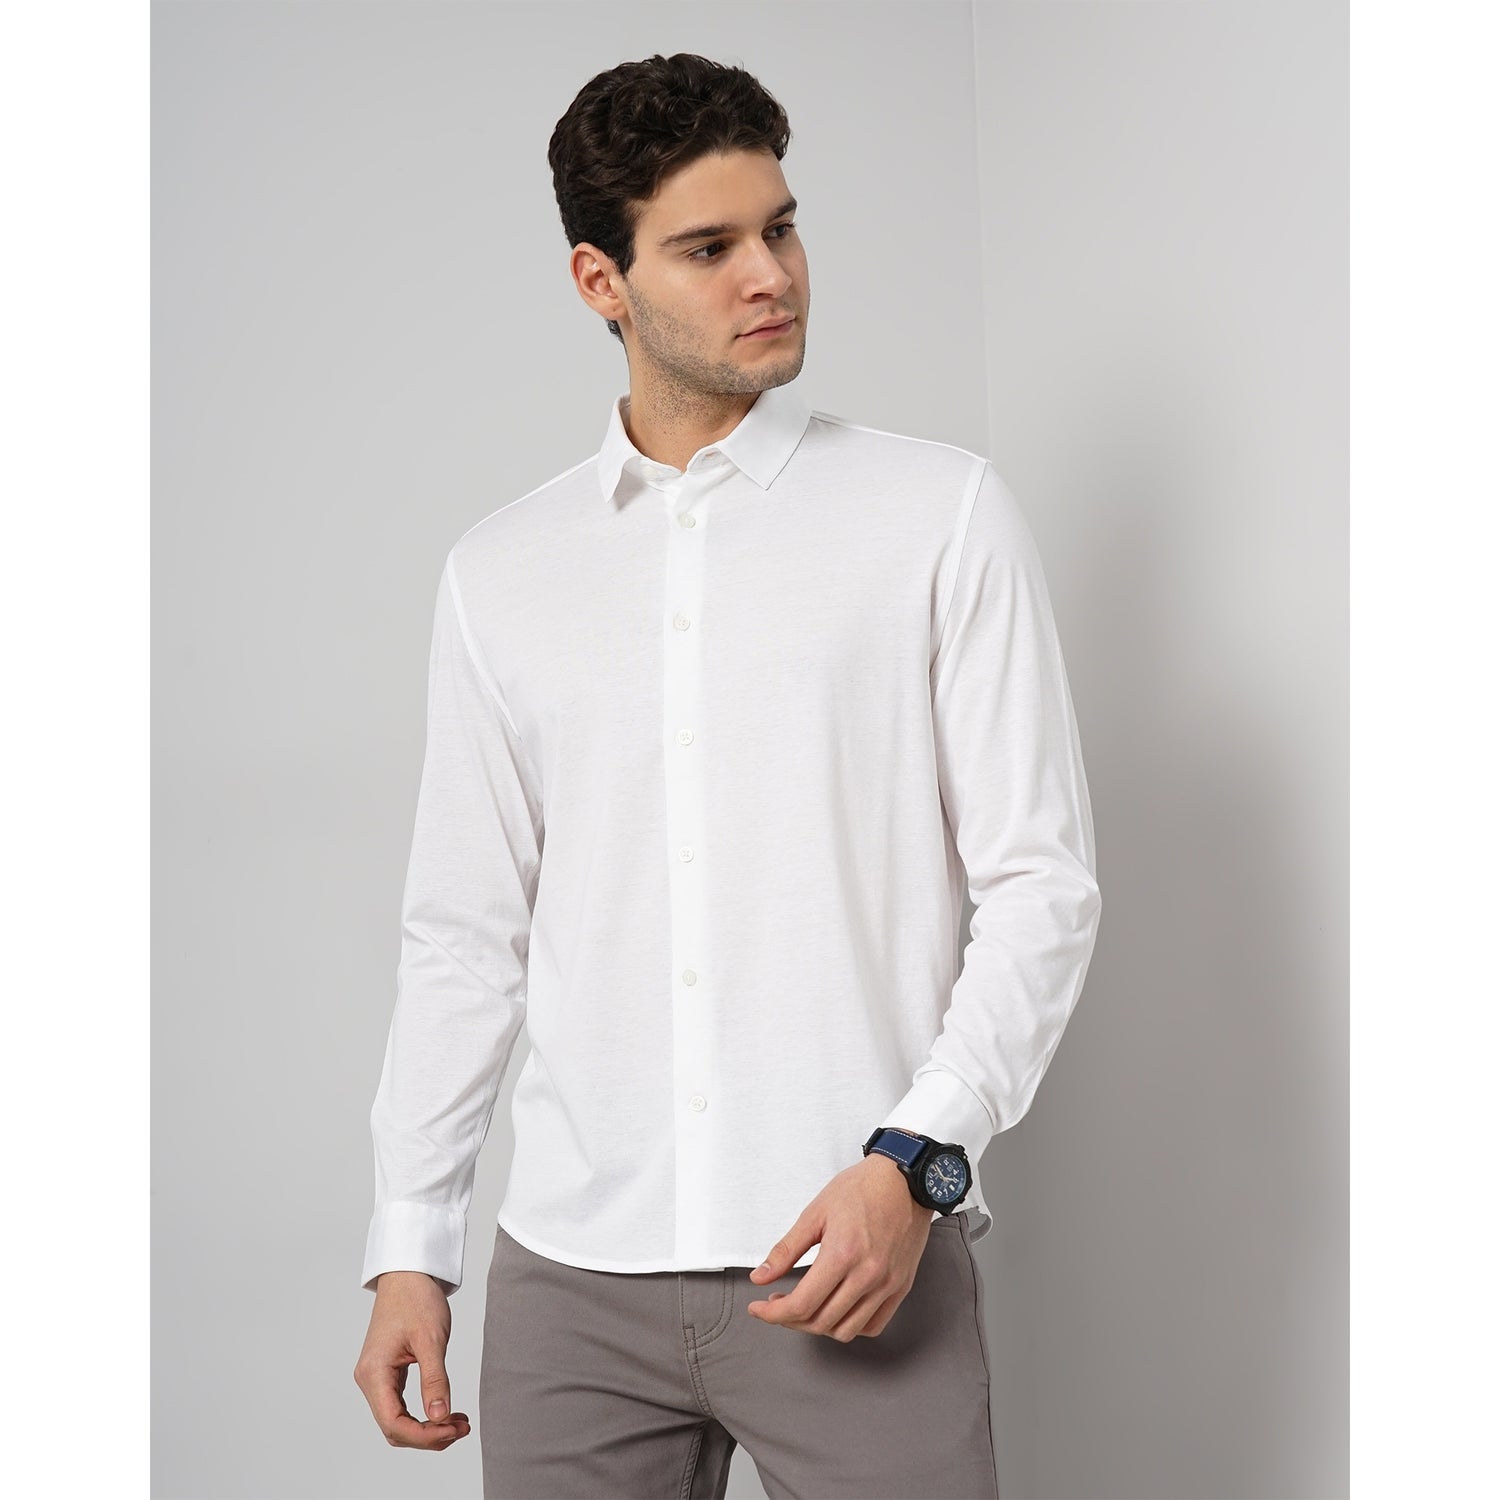 White Solid Full Sleeve Cotton Shirts (VAJERSEY)